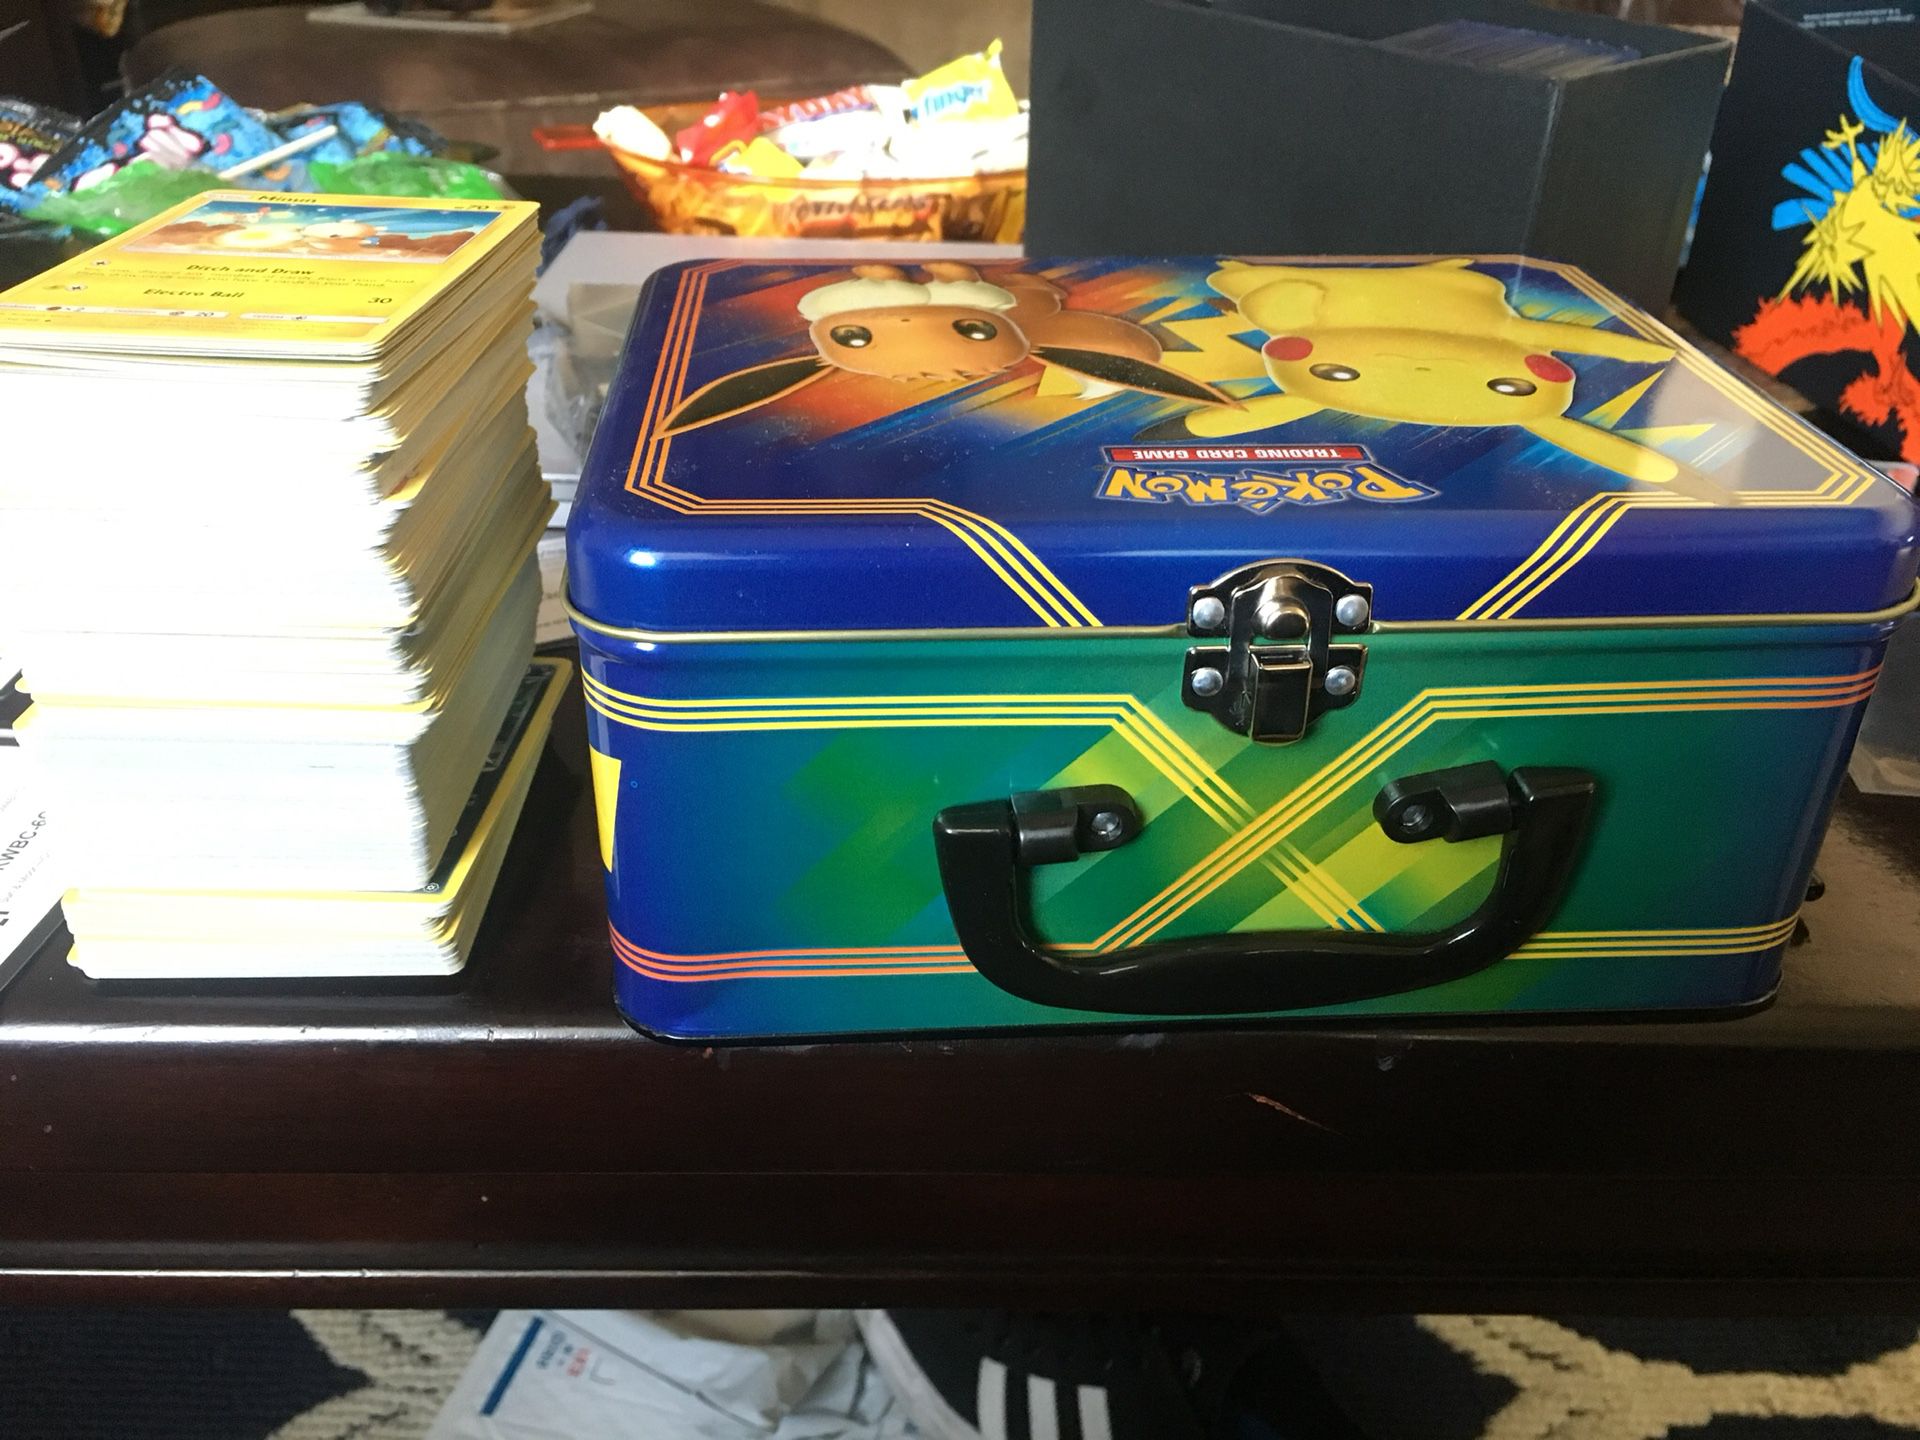 800+ Pokémon Cards and more!